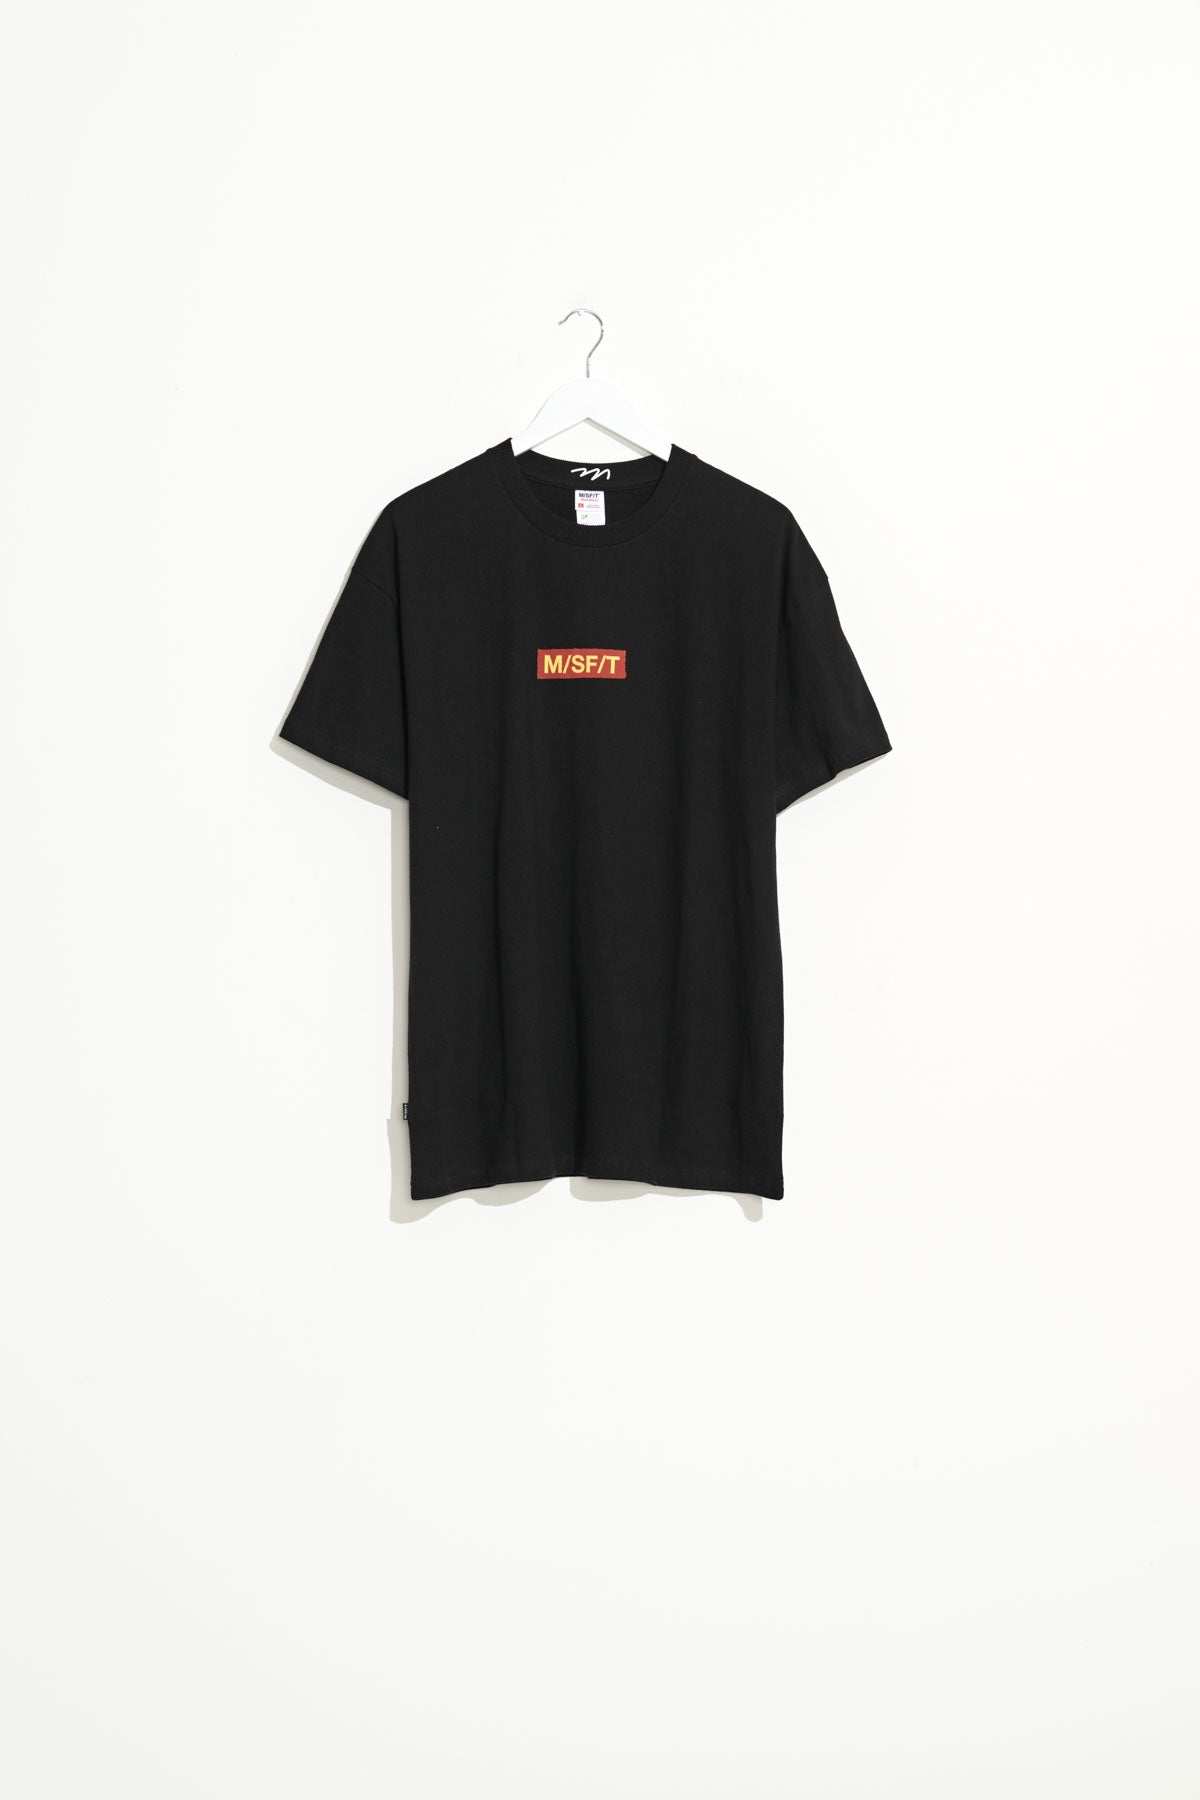 Misfit Shapes - Dribble 50-50 Aaa SS Tee - Washed Black